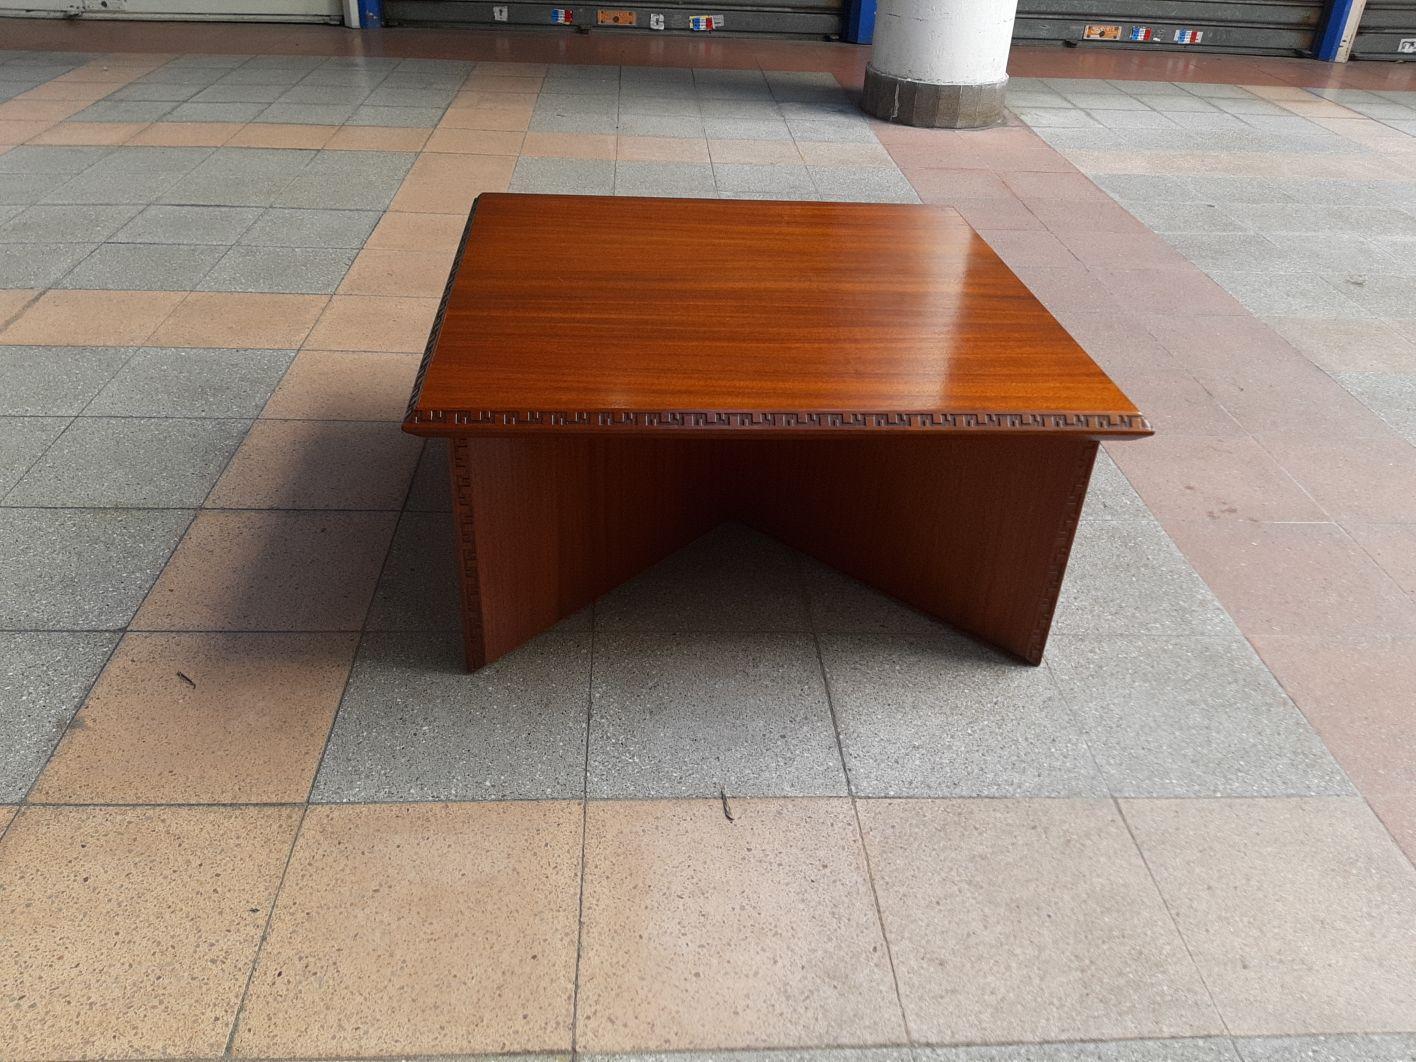 rare and looked after Frank Lloyd Wright coffee table
1955
Plain mahogany
Dated and signed
Heritage Herendon Edition
perfect condition.